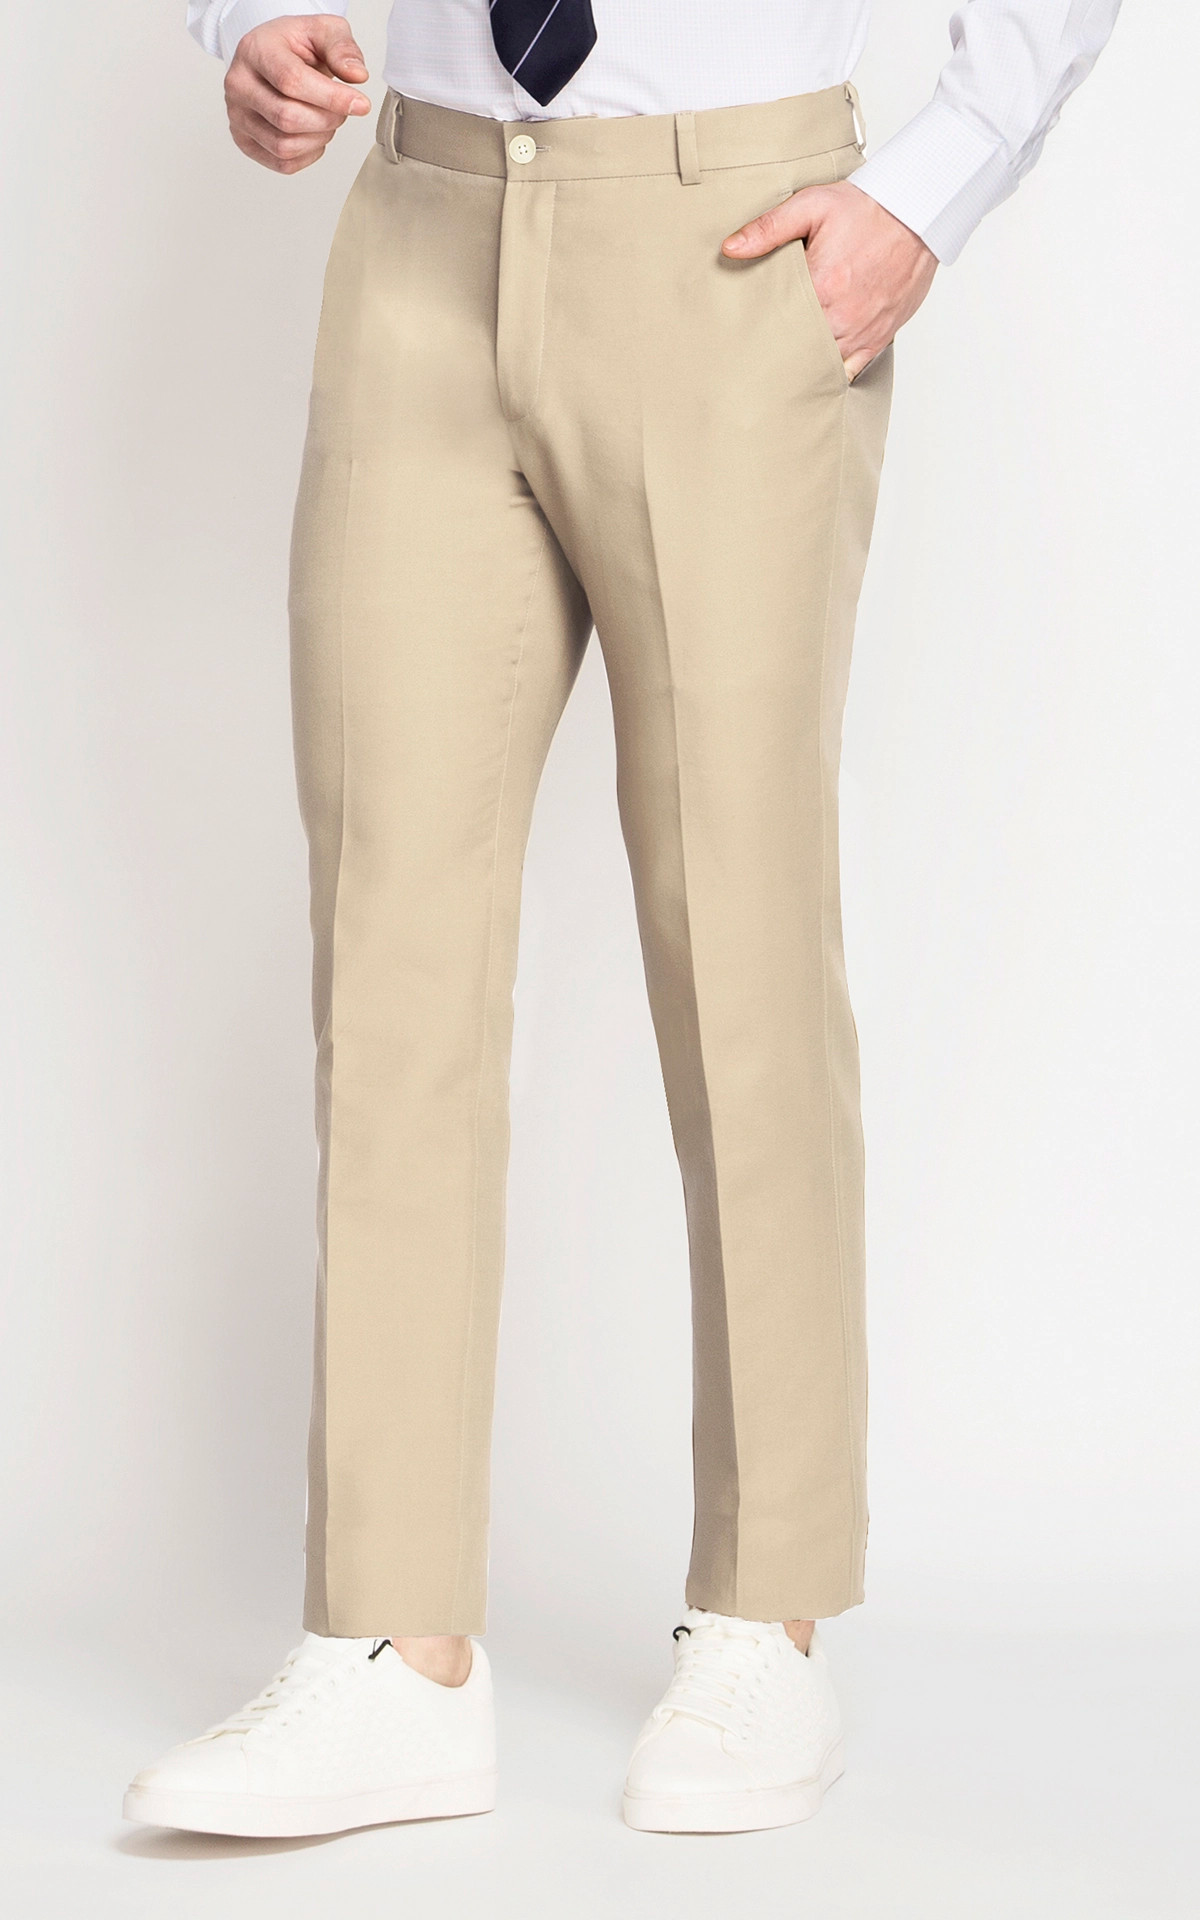 Belted Fit & Flare Trousers - Cream - Pomelo Fashion